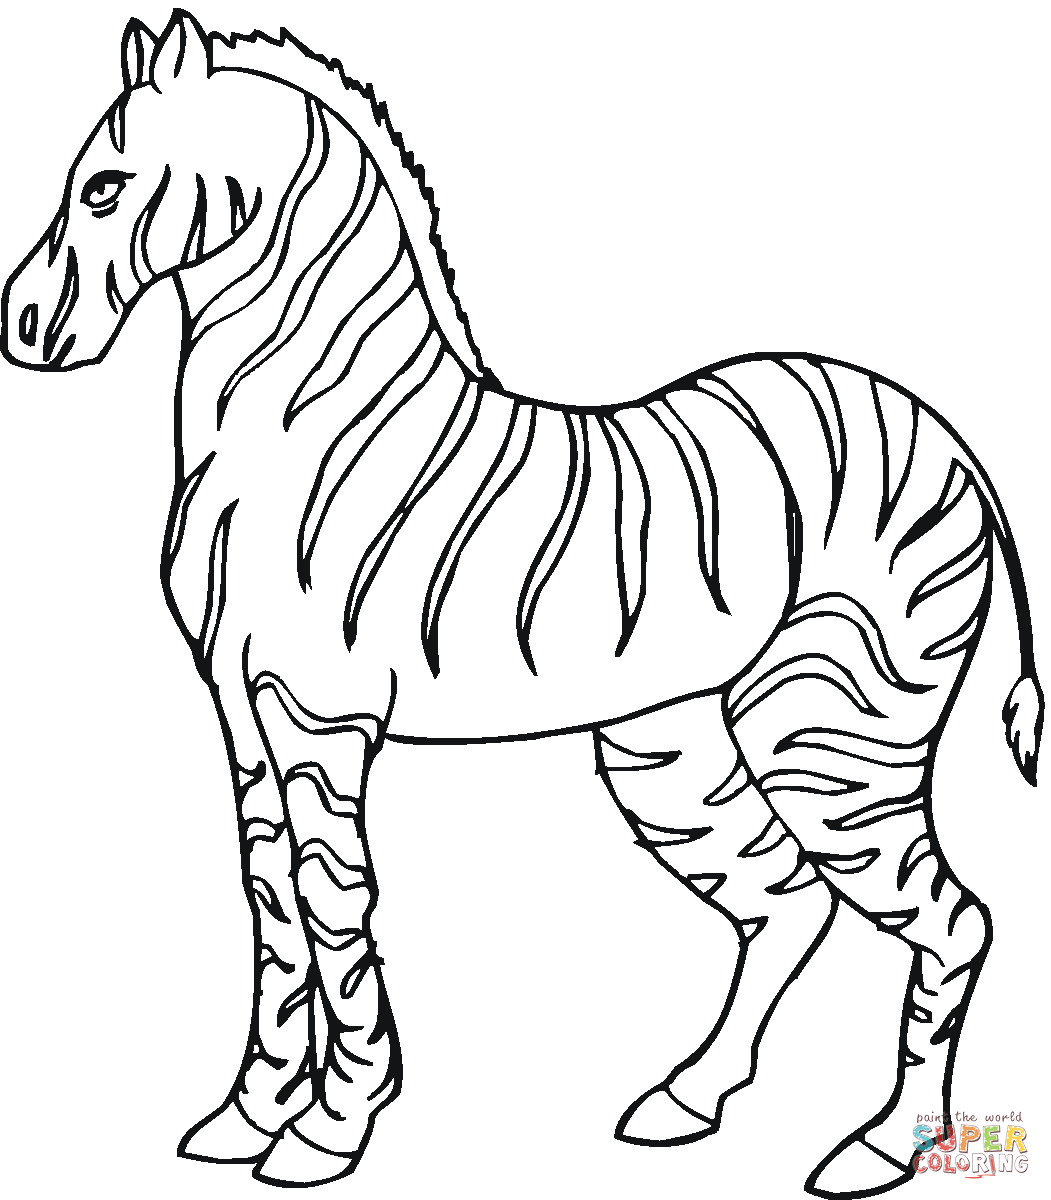 Zebra Coloring Pages Printable
 Zebra 6 coloring page